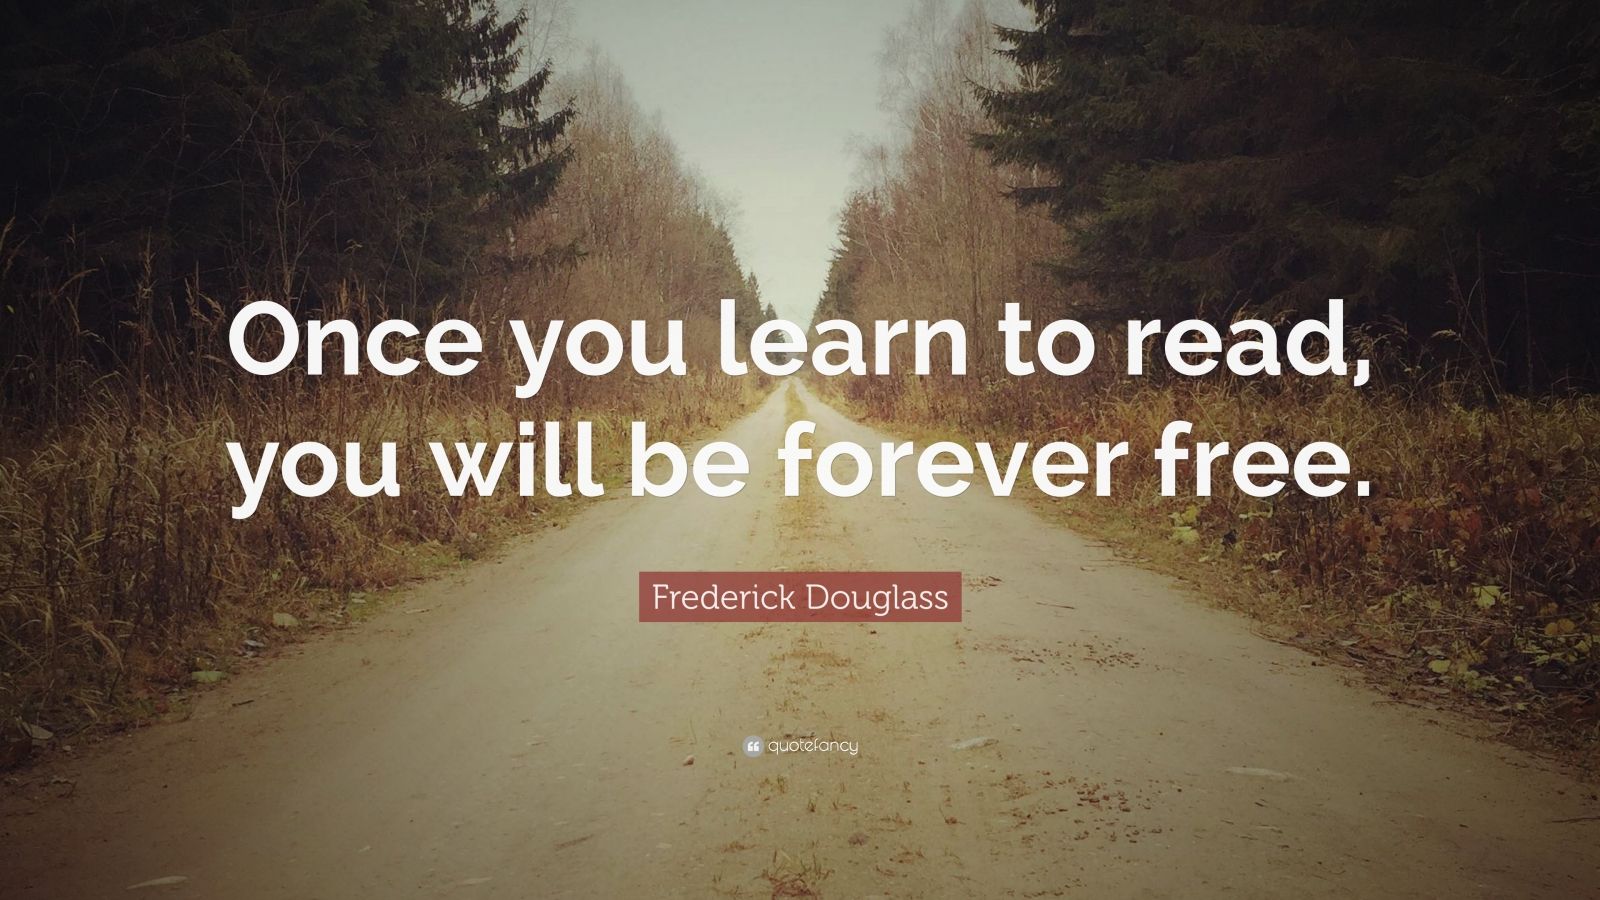 Frederick Douglass Quote: “Once you learn to read, you will be forever